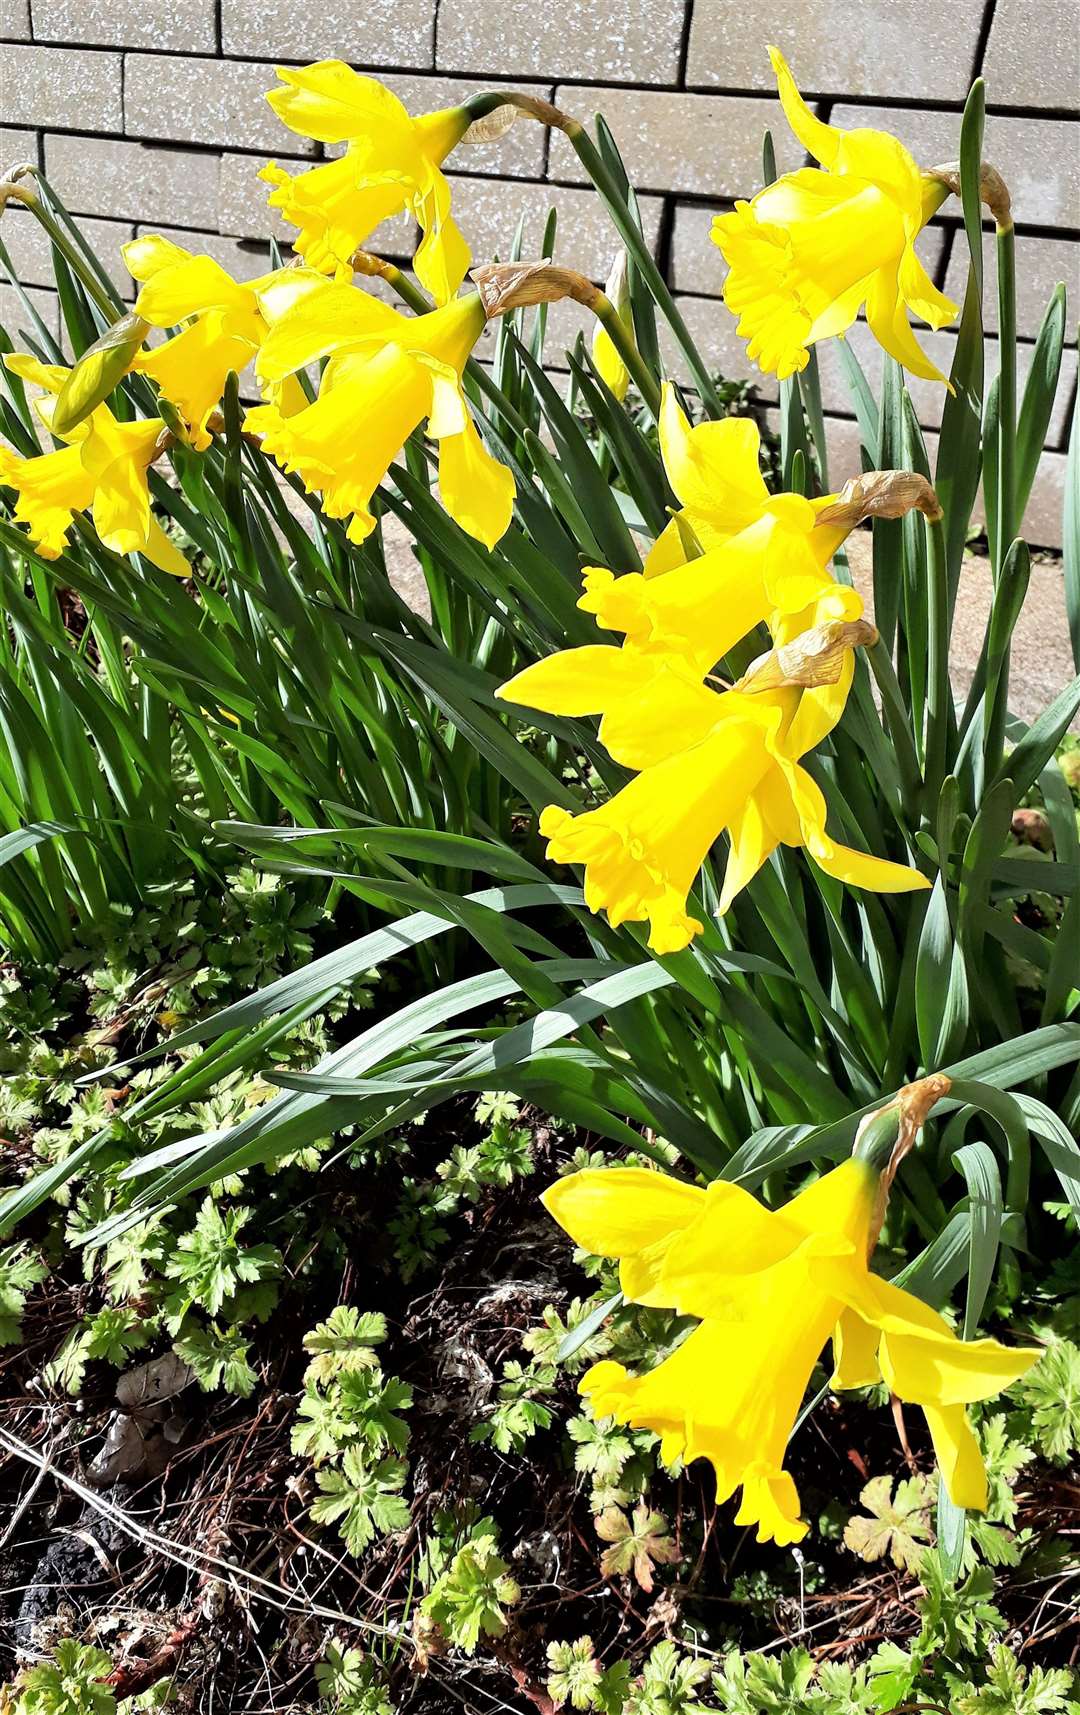 Daffodils are flowering throughout Caithness to help dispel the lockdown gloom. Picture: Keith Banks